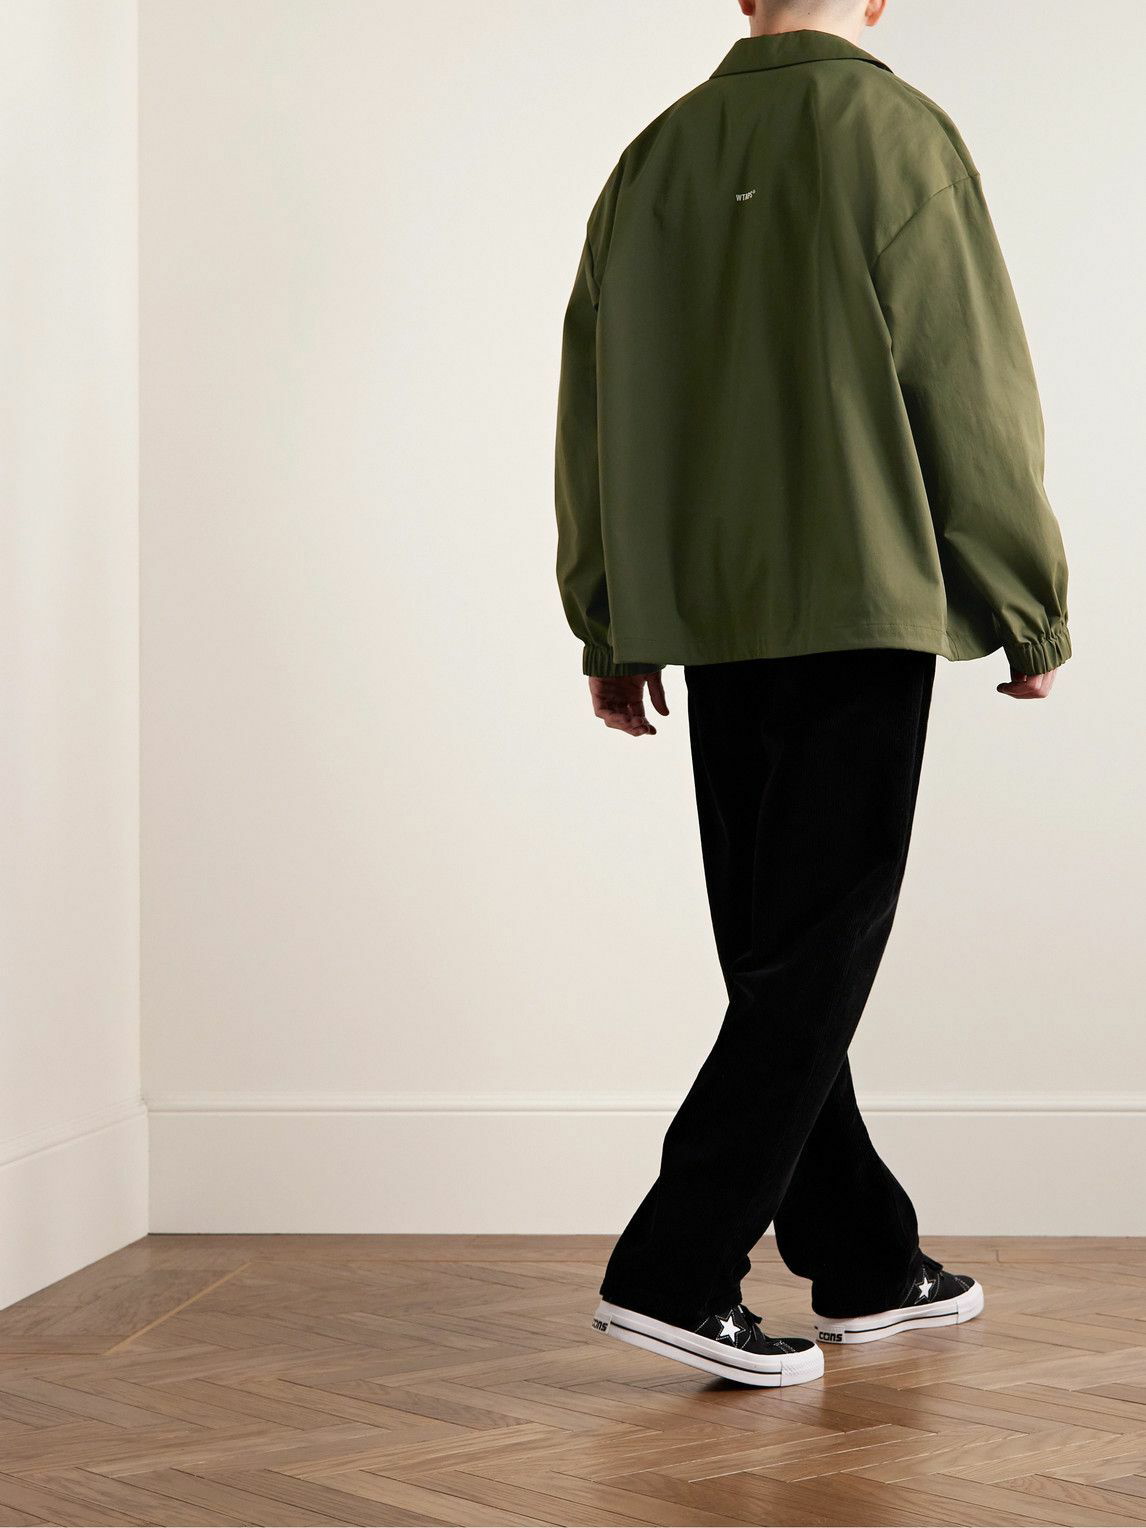 WTAPS CHIEF /JACKET / POLY. TWILL. SIGN-